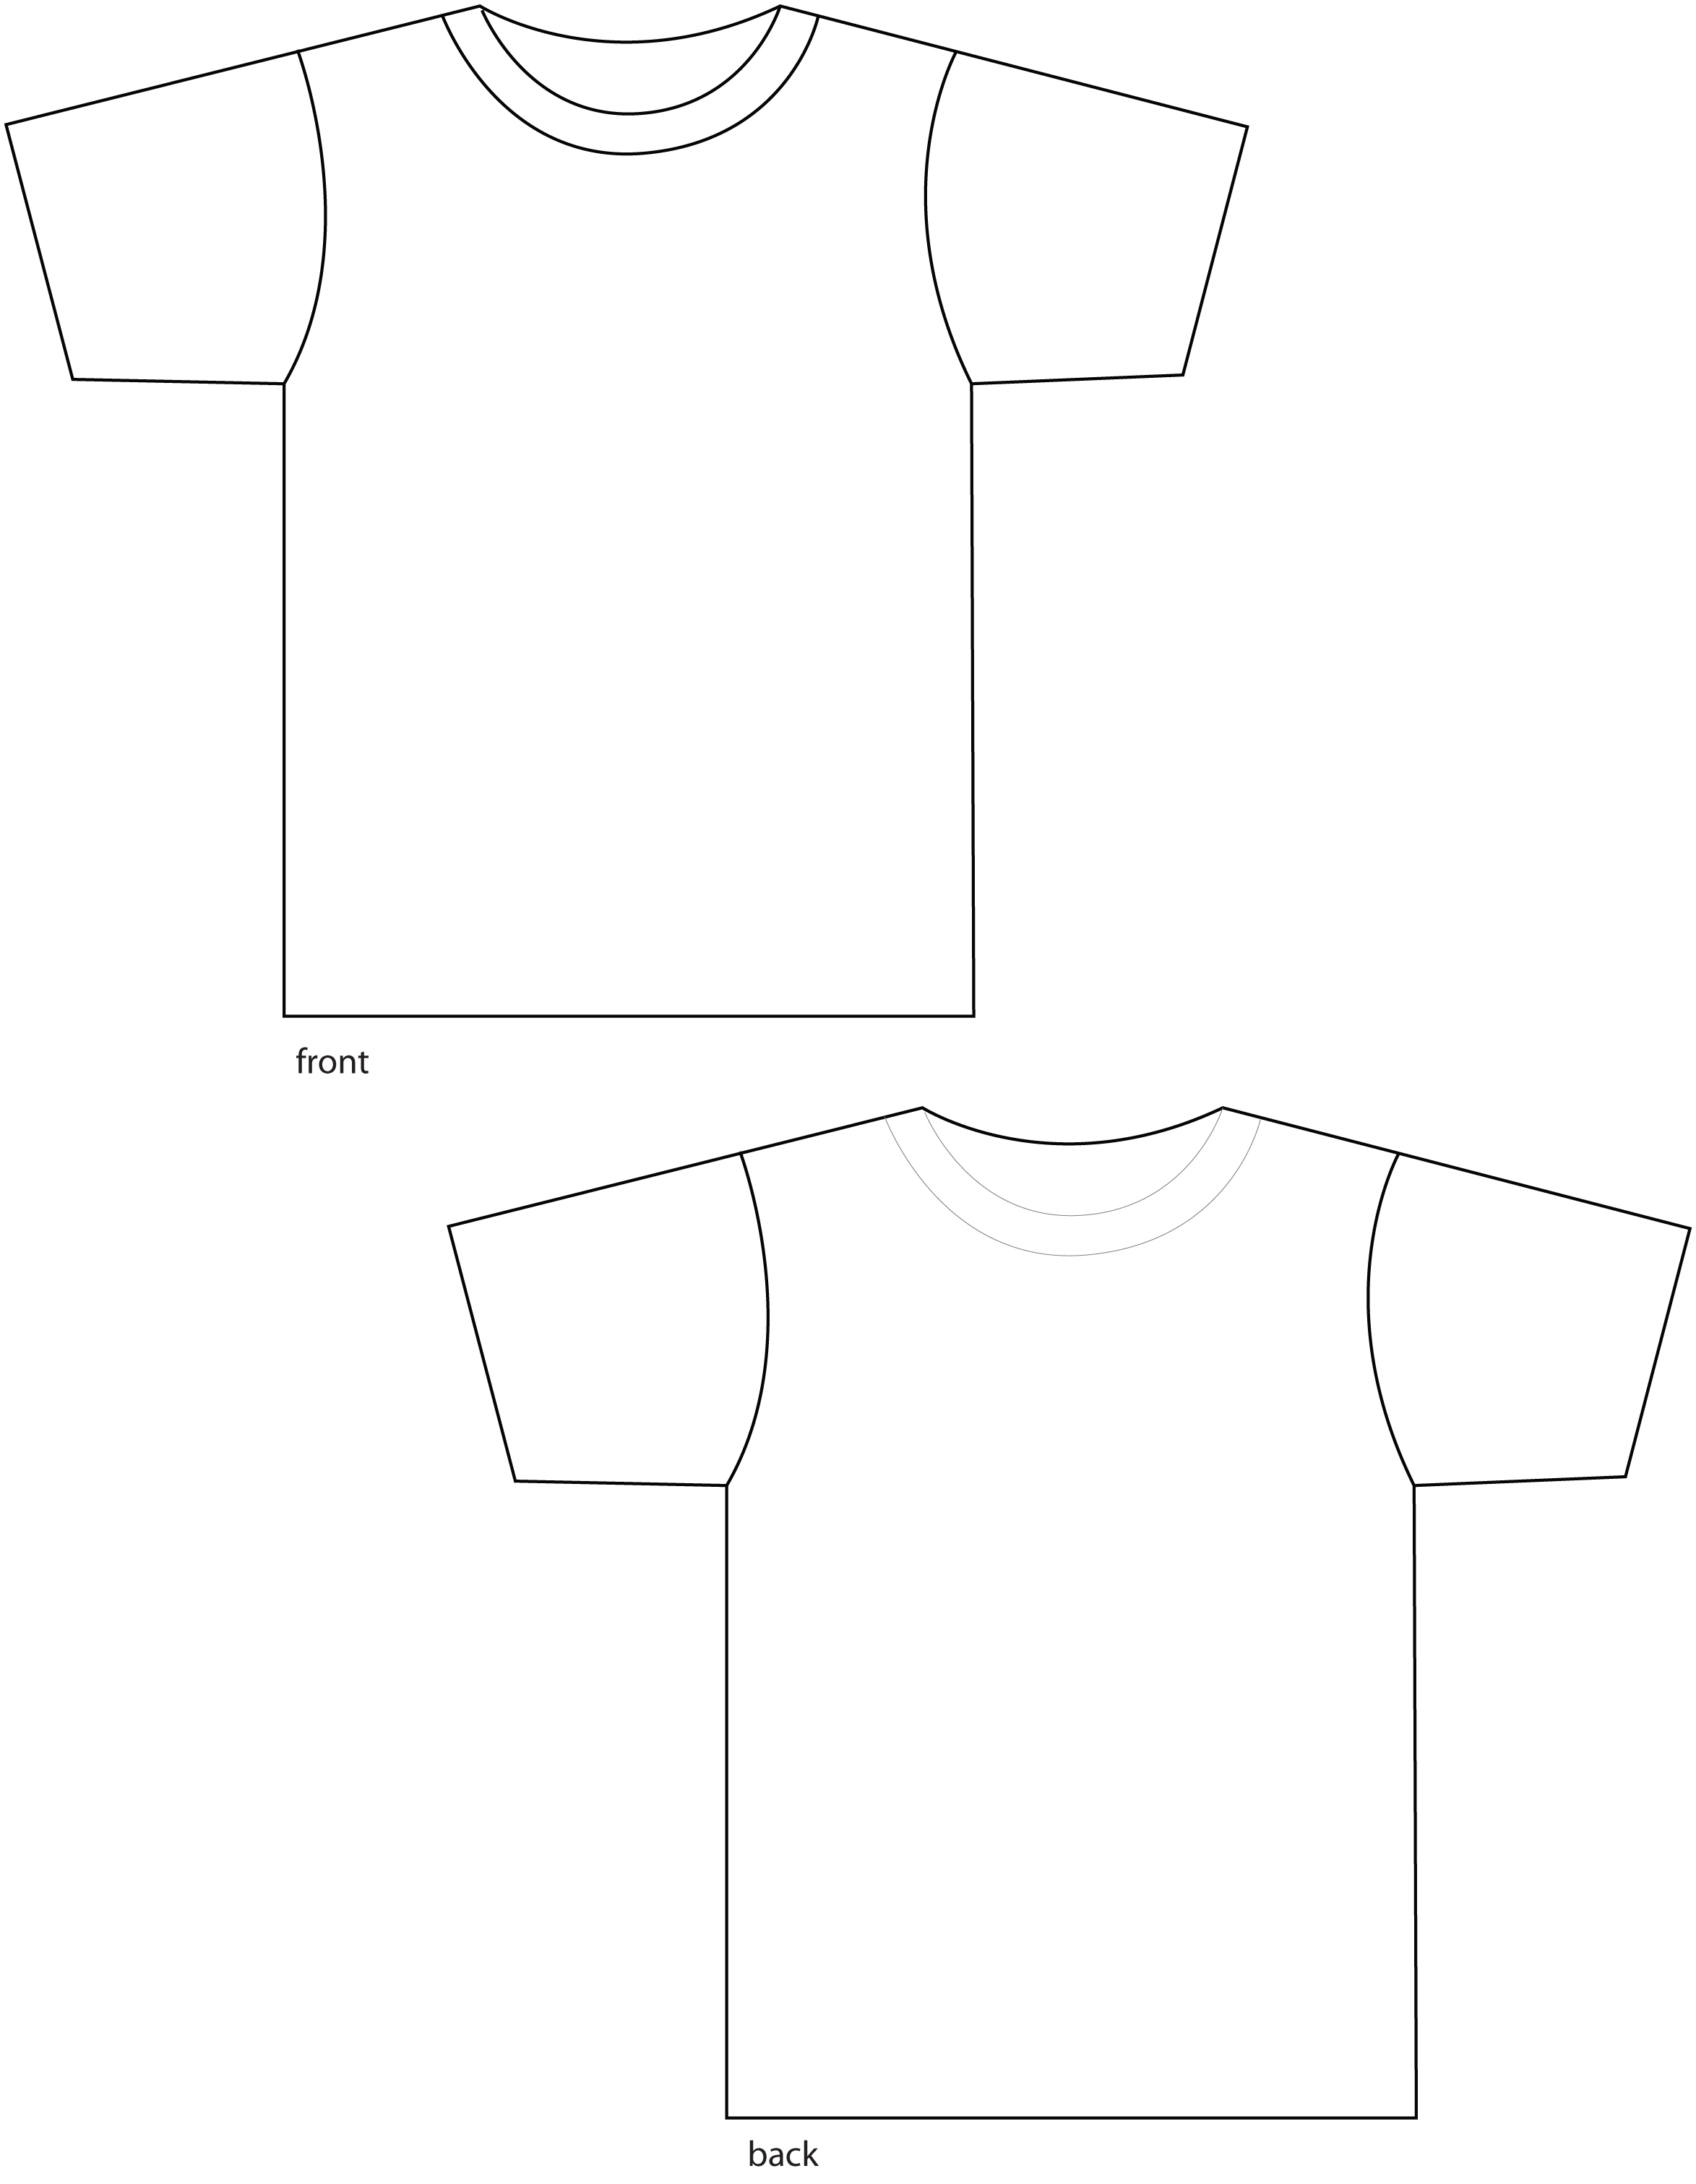 Shirttemplate | Free Images at Clker.com - vector clip art online ...